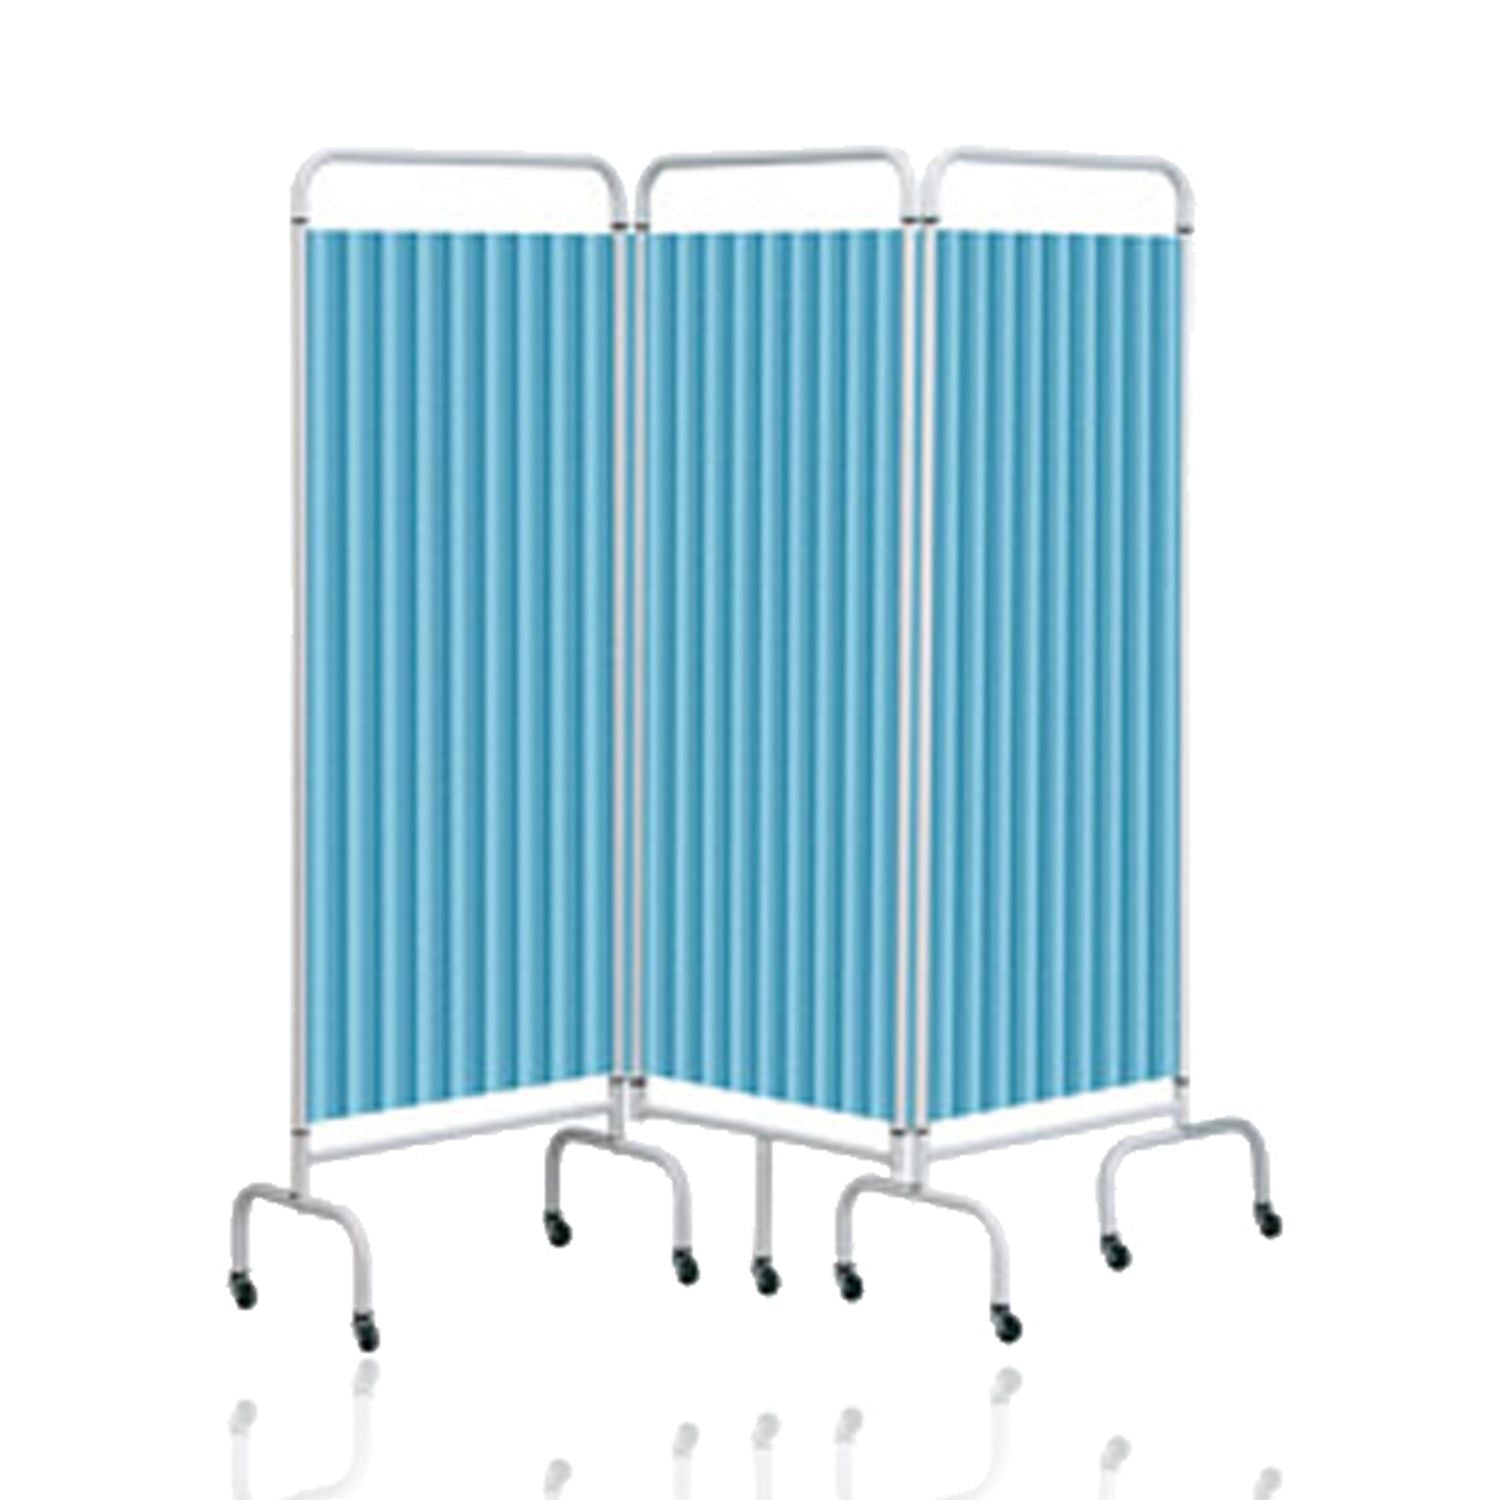 Sunflower 3 Section Mobile Folding Screen with Hygienic Disposable Curtains (9)